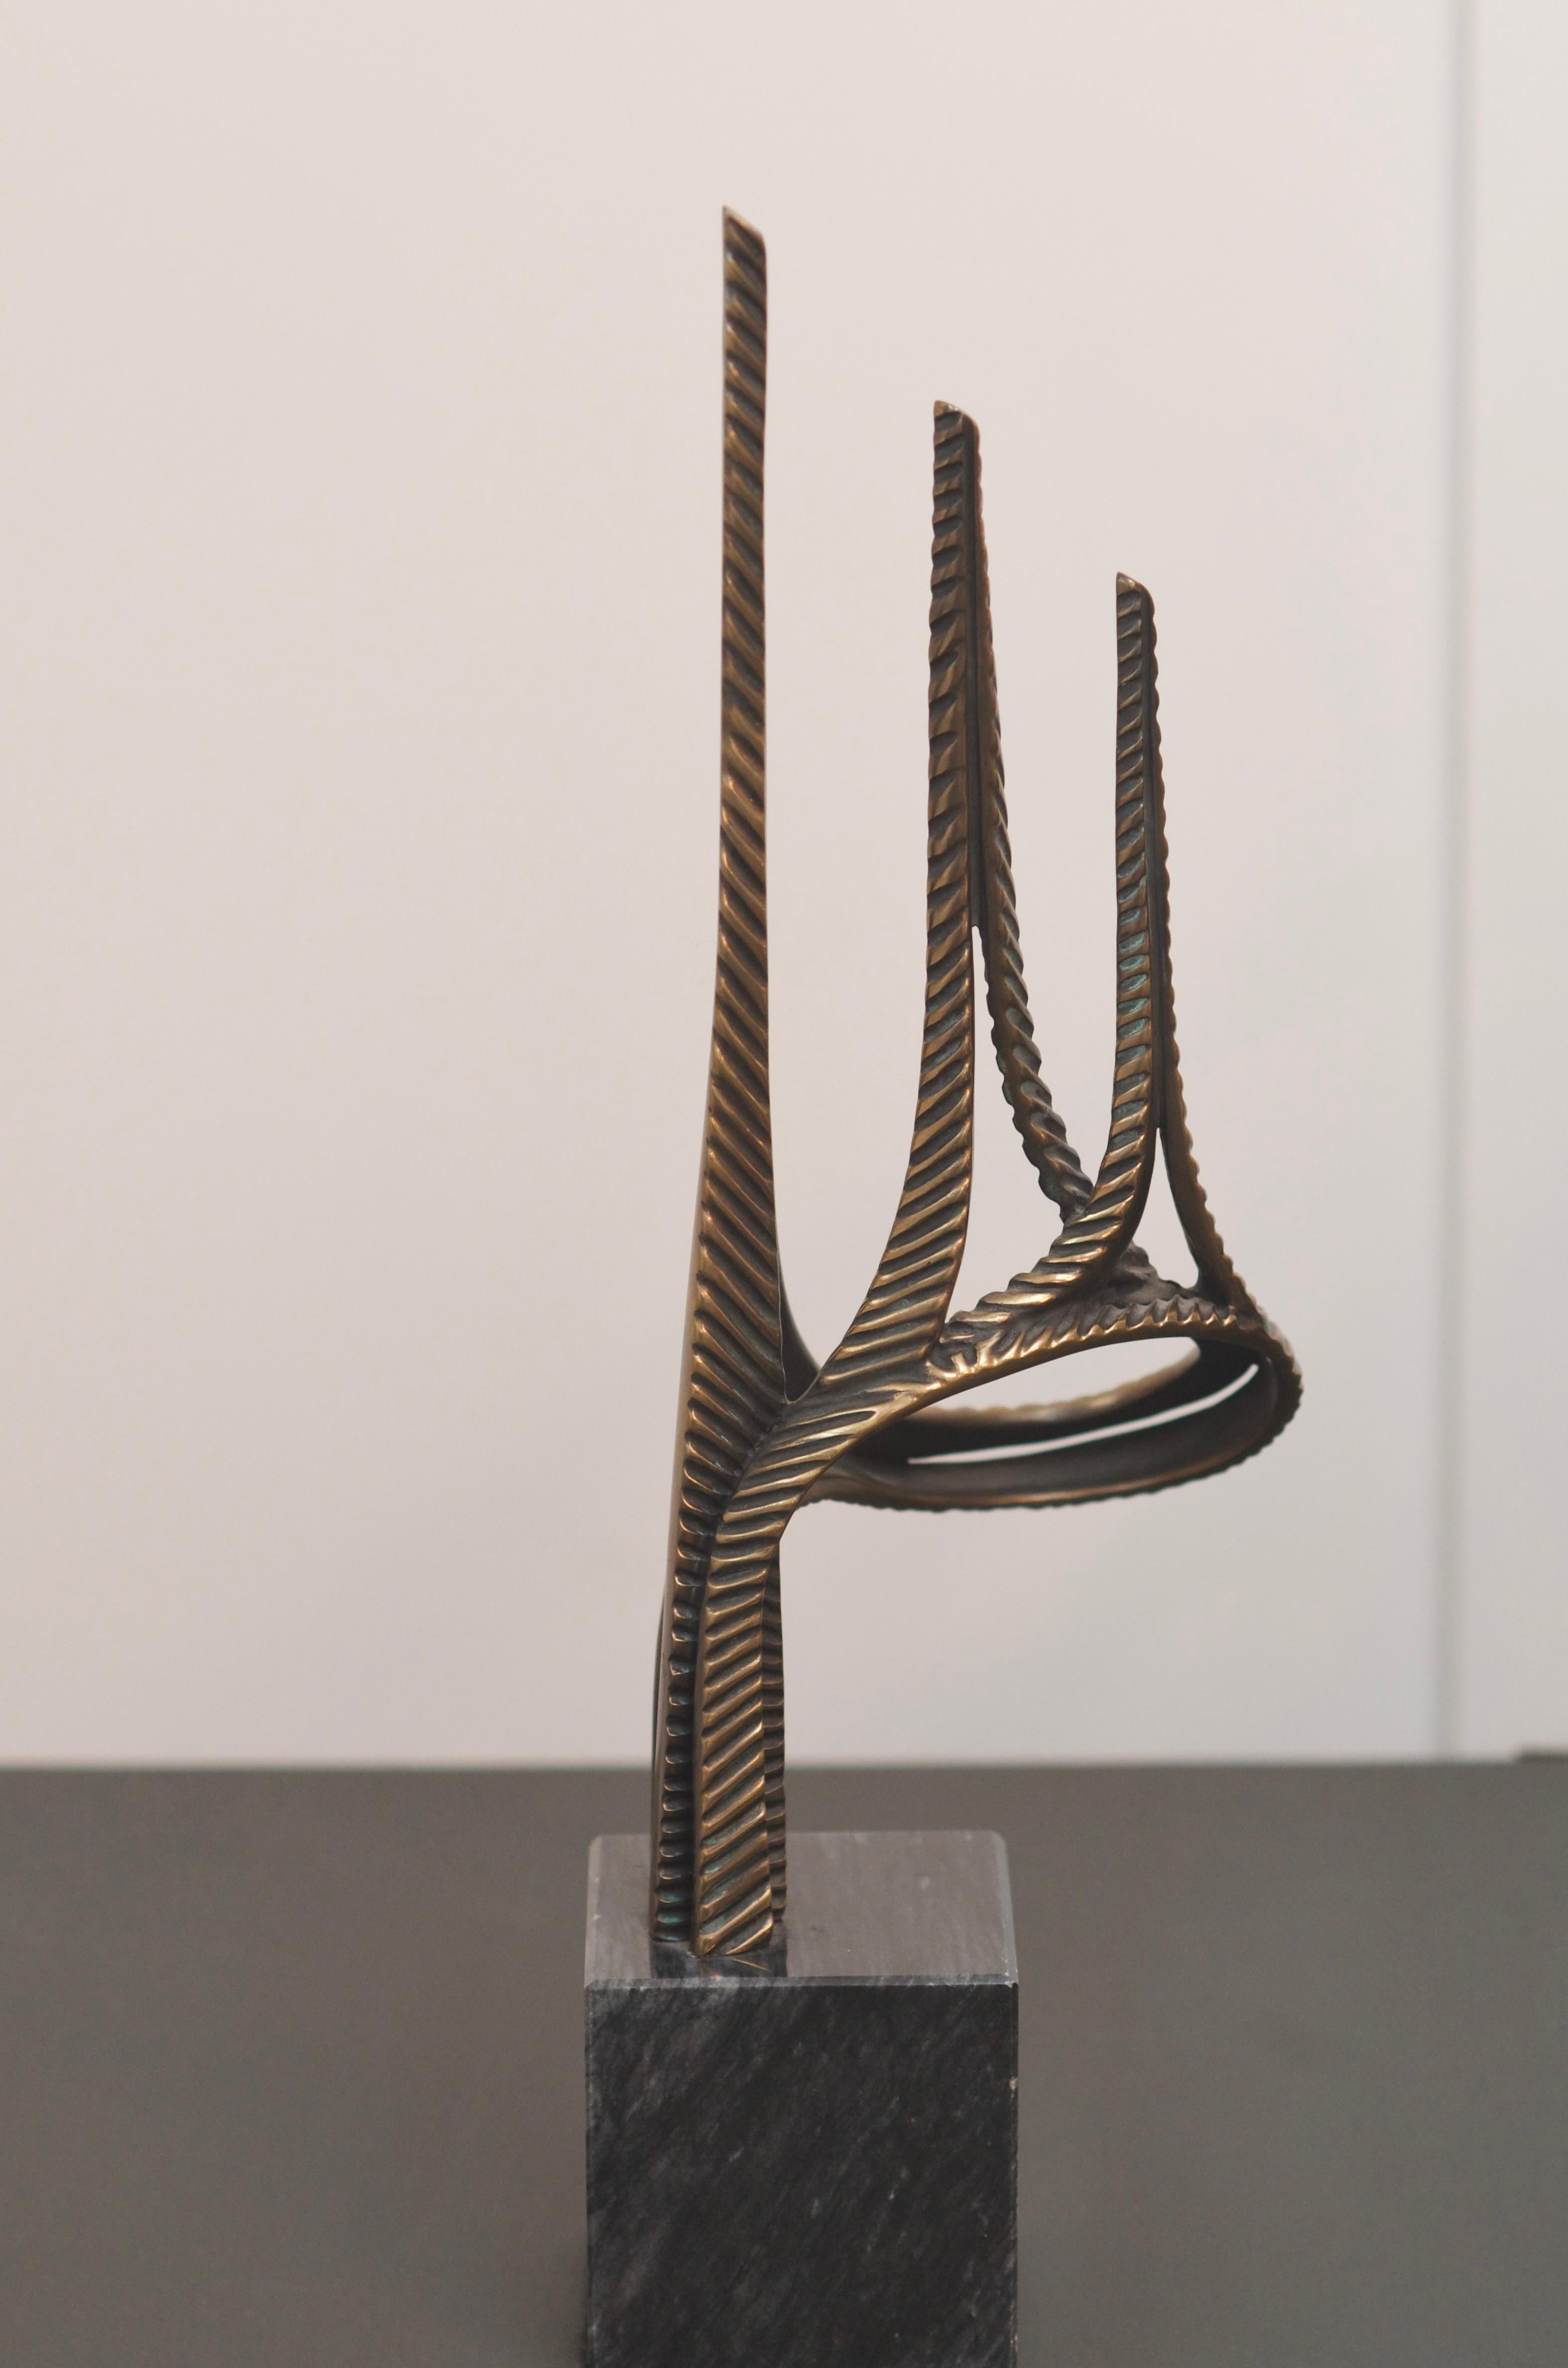 A stunning abstract bronze sculpture inspired by the Golden Gate Bridge in San Francisco on a black marble cube base by California artist, Bob Bennett. Bob (Robert) M. Bennett (California, 1928-2003). This signed cast bronze sculpture is a beautiful